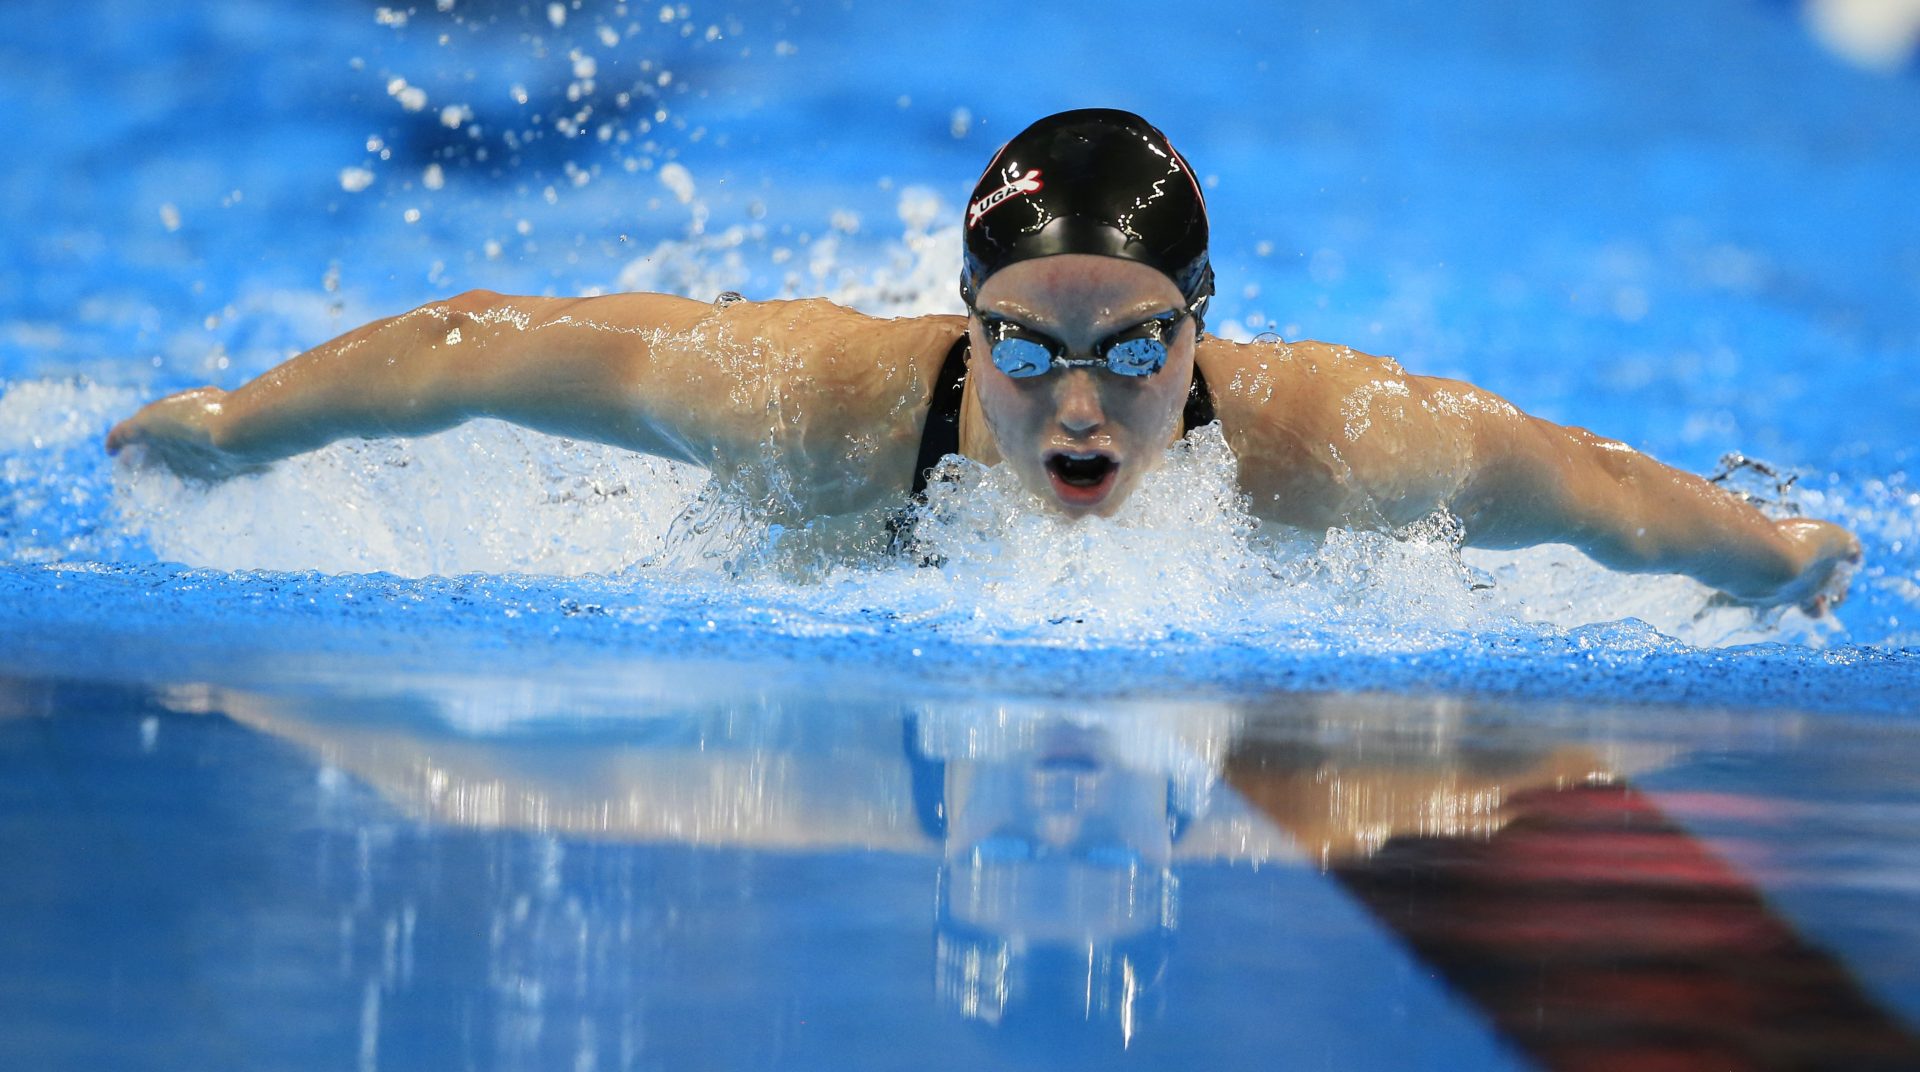 Hali Flickinger of Spring Grove, York County, competes for the U.S. in a semifinal of the women's 200-meter butterfly at the Summer Olympics in Rio de Janeiro, Brazil. Flickinger placed seventh in the event’s final heat.